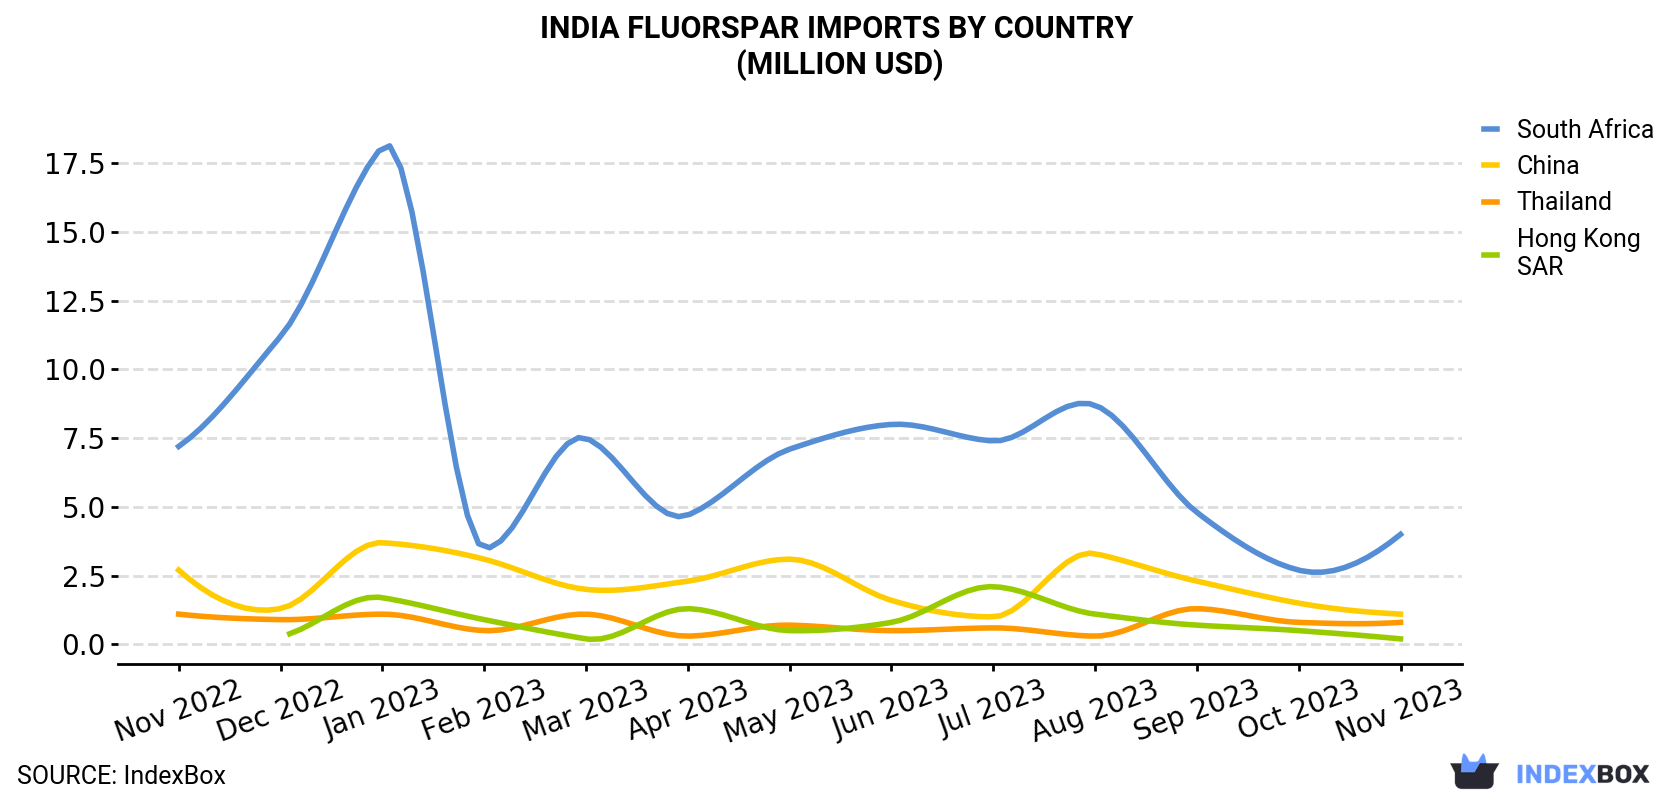 India Fluorspar Imports By Country (Million USD)